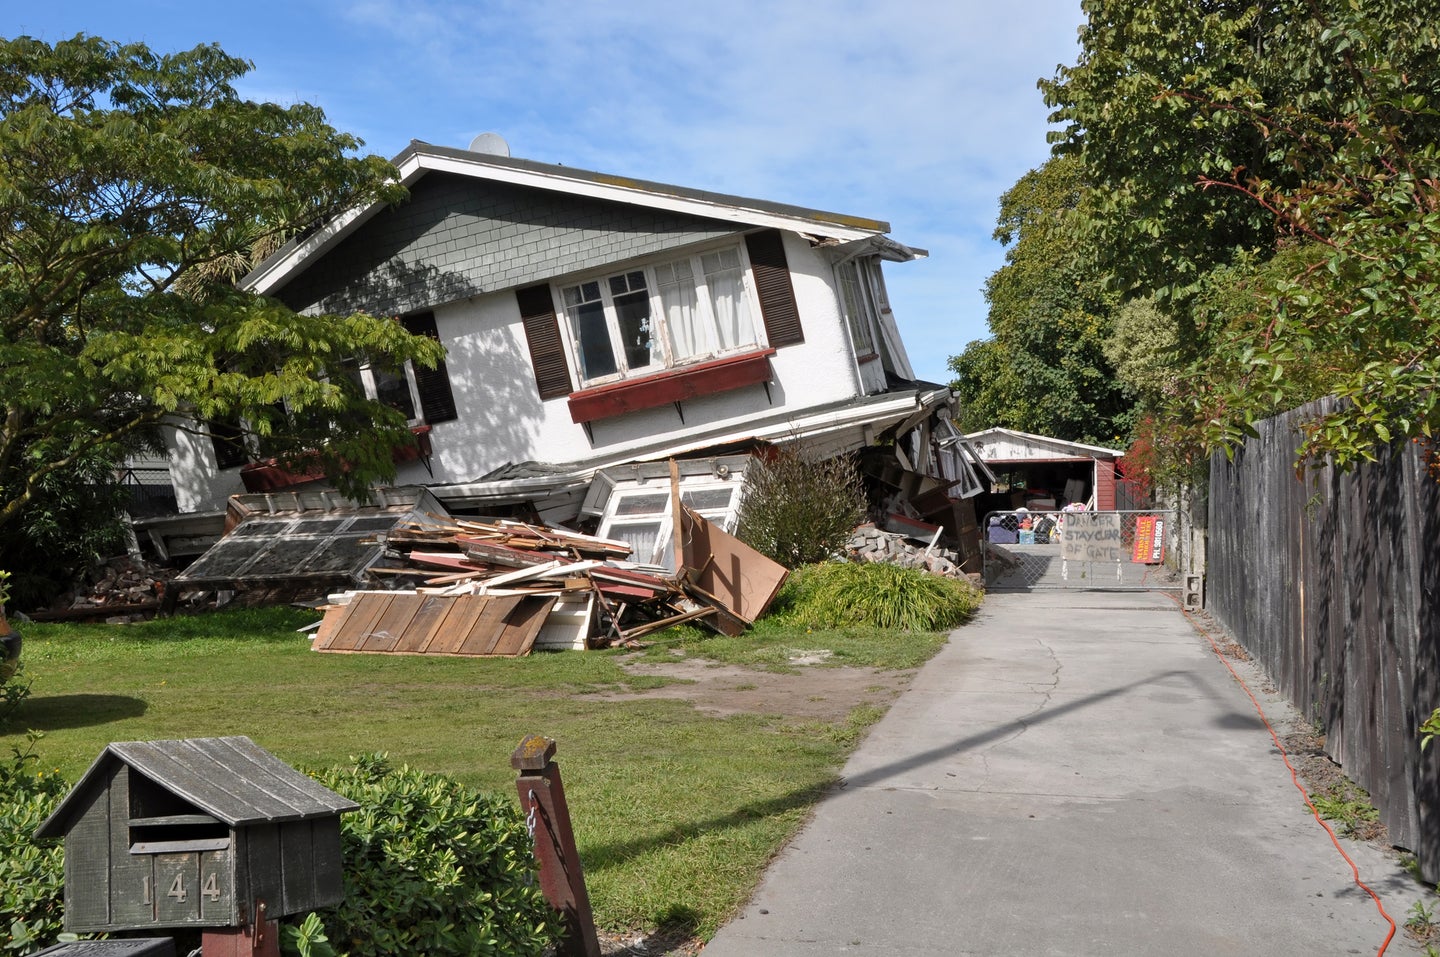 A 7.1 magnitude earthquake in Christchurch, New Zealand, destroyed homes and lives.